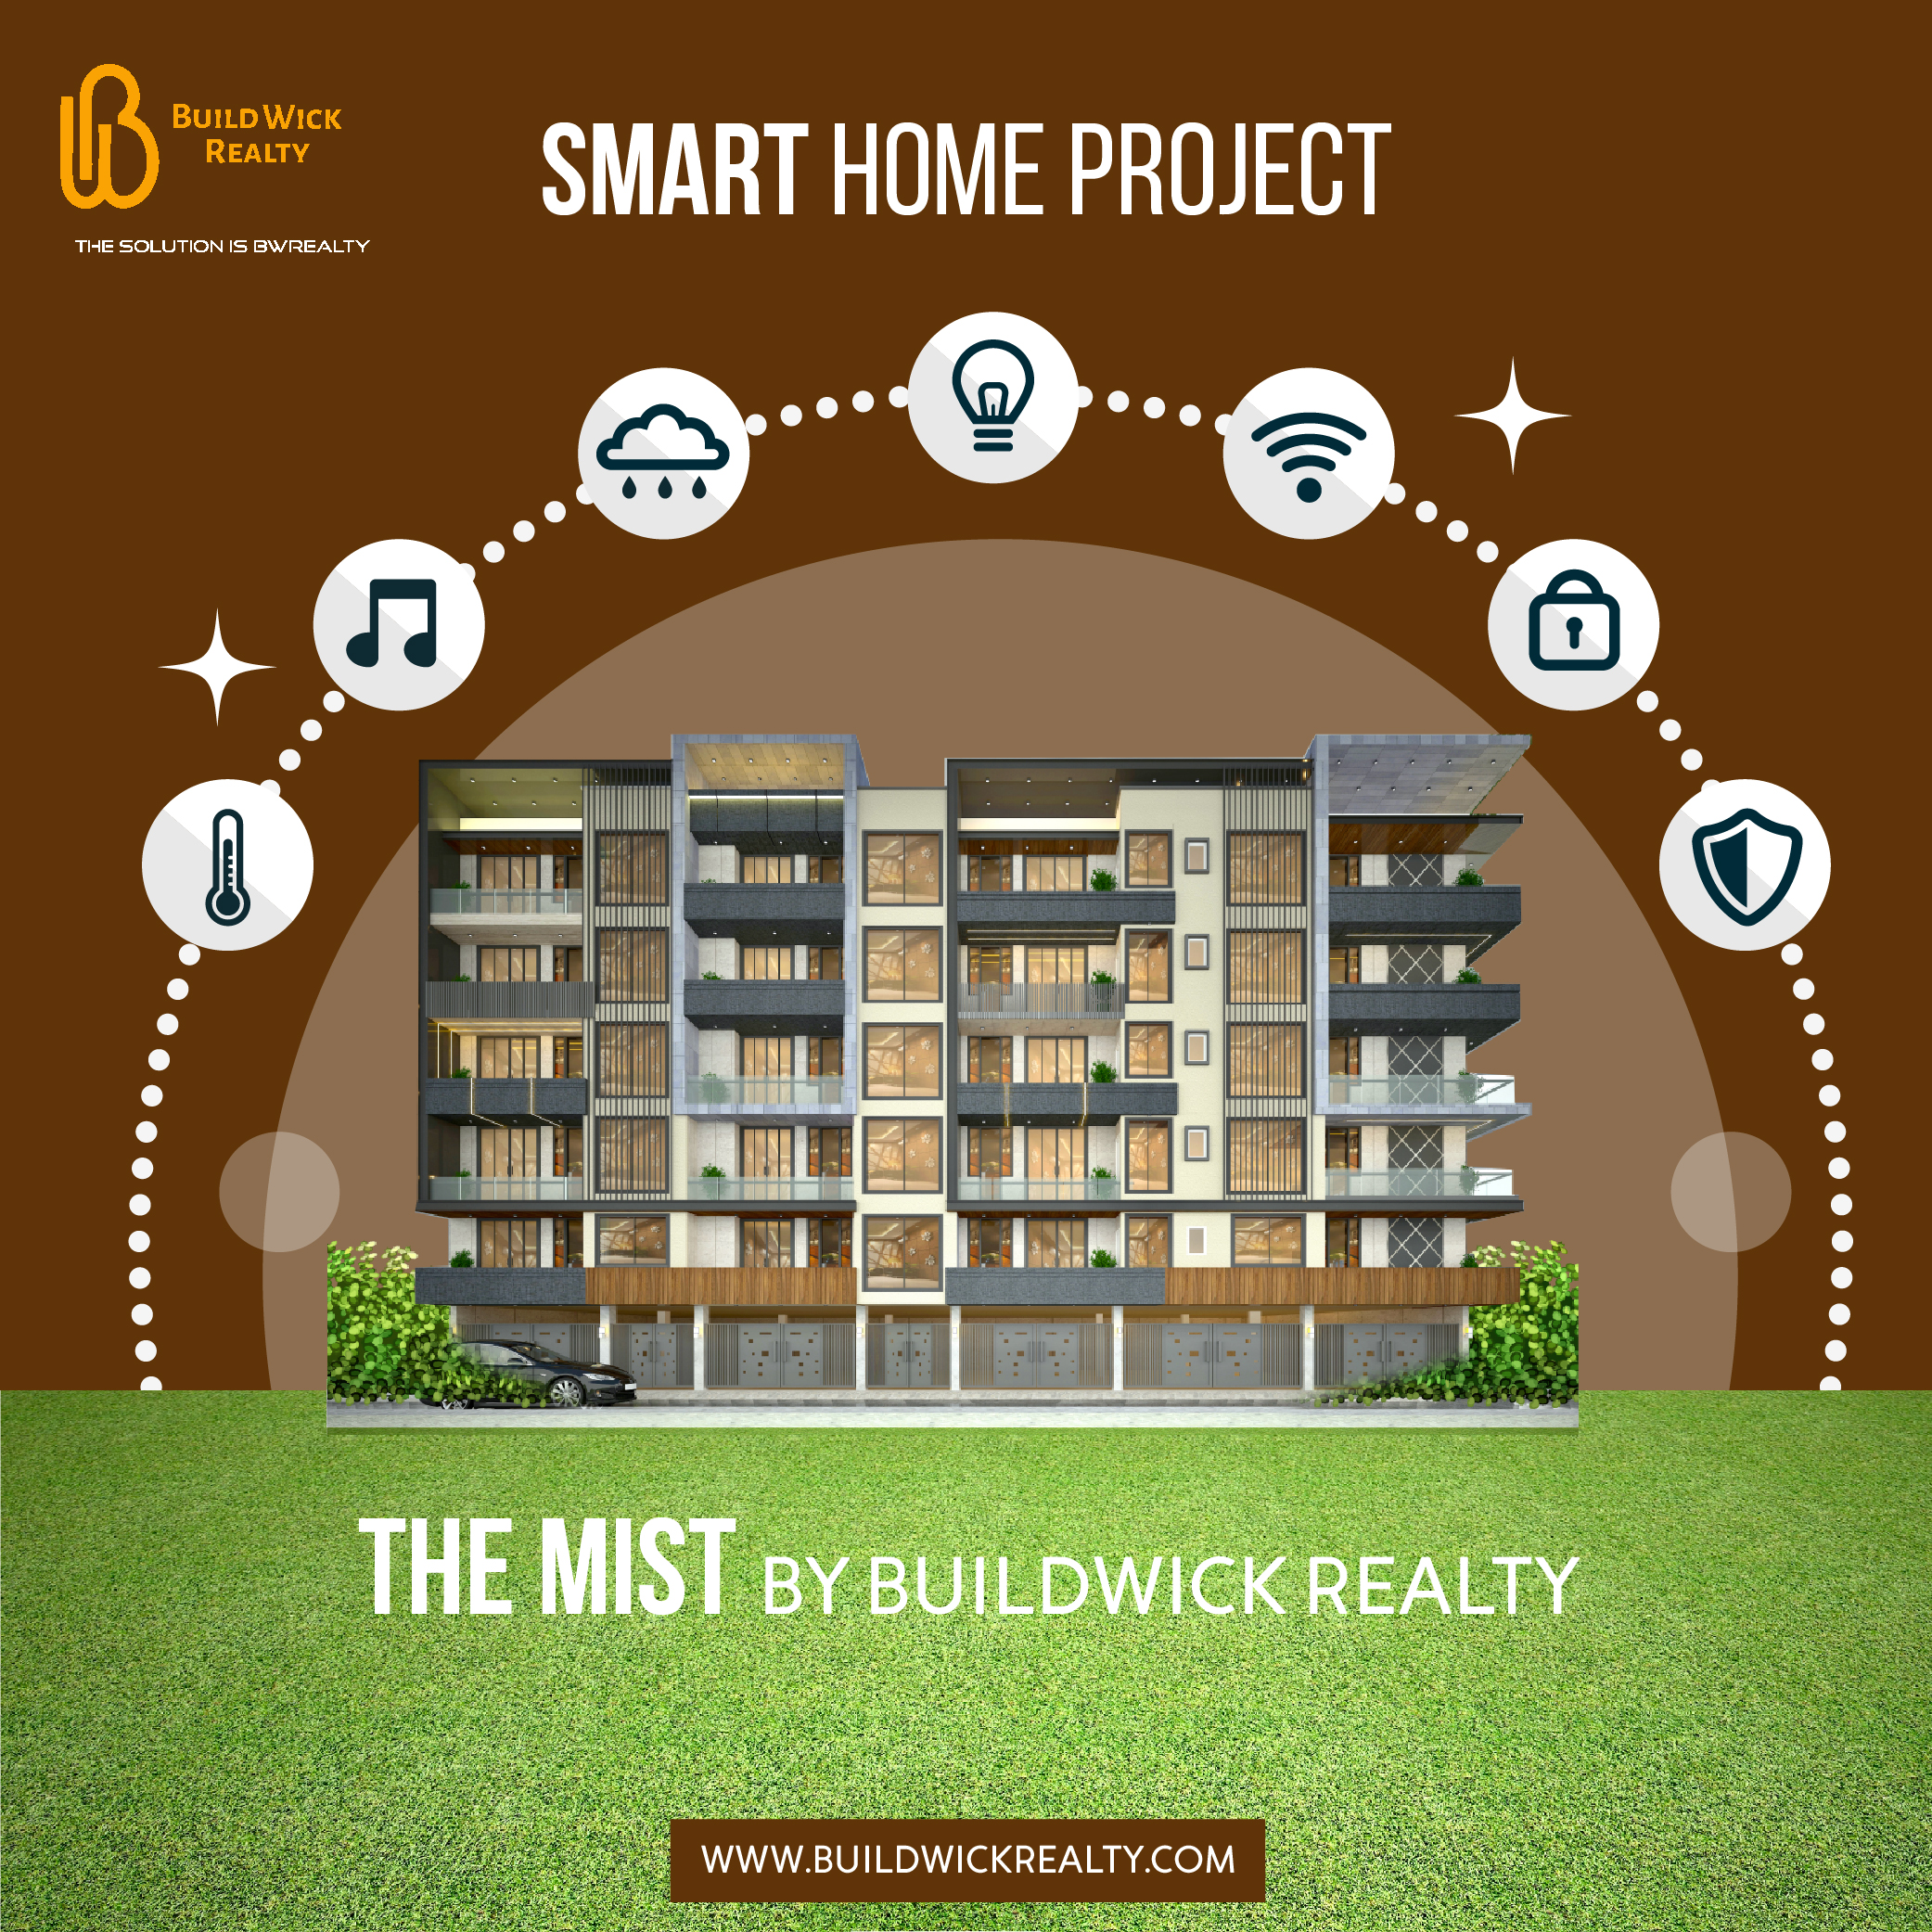 BuiLb Wick

=~ SMART HOME PROJECT

TIHE SOLUTION IS BWREALTY

 

ARE J) i «

WWW.BUILDWICKREALTY.COM

 

HNEE - &gt; D7
ad acoRe CRS NE SBE ae Sr Re ST a